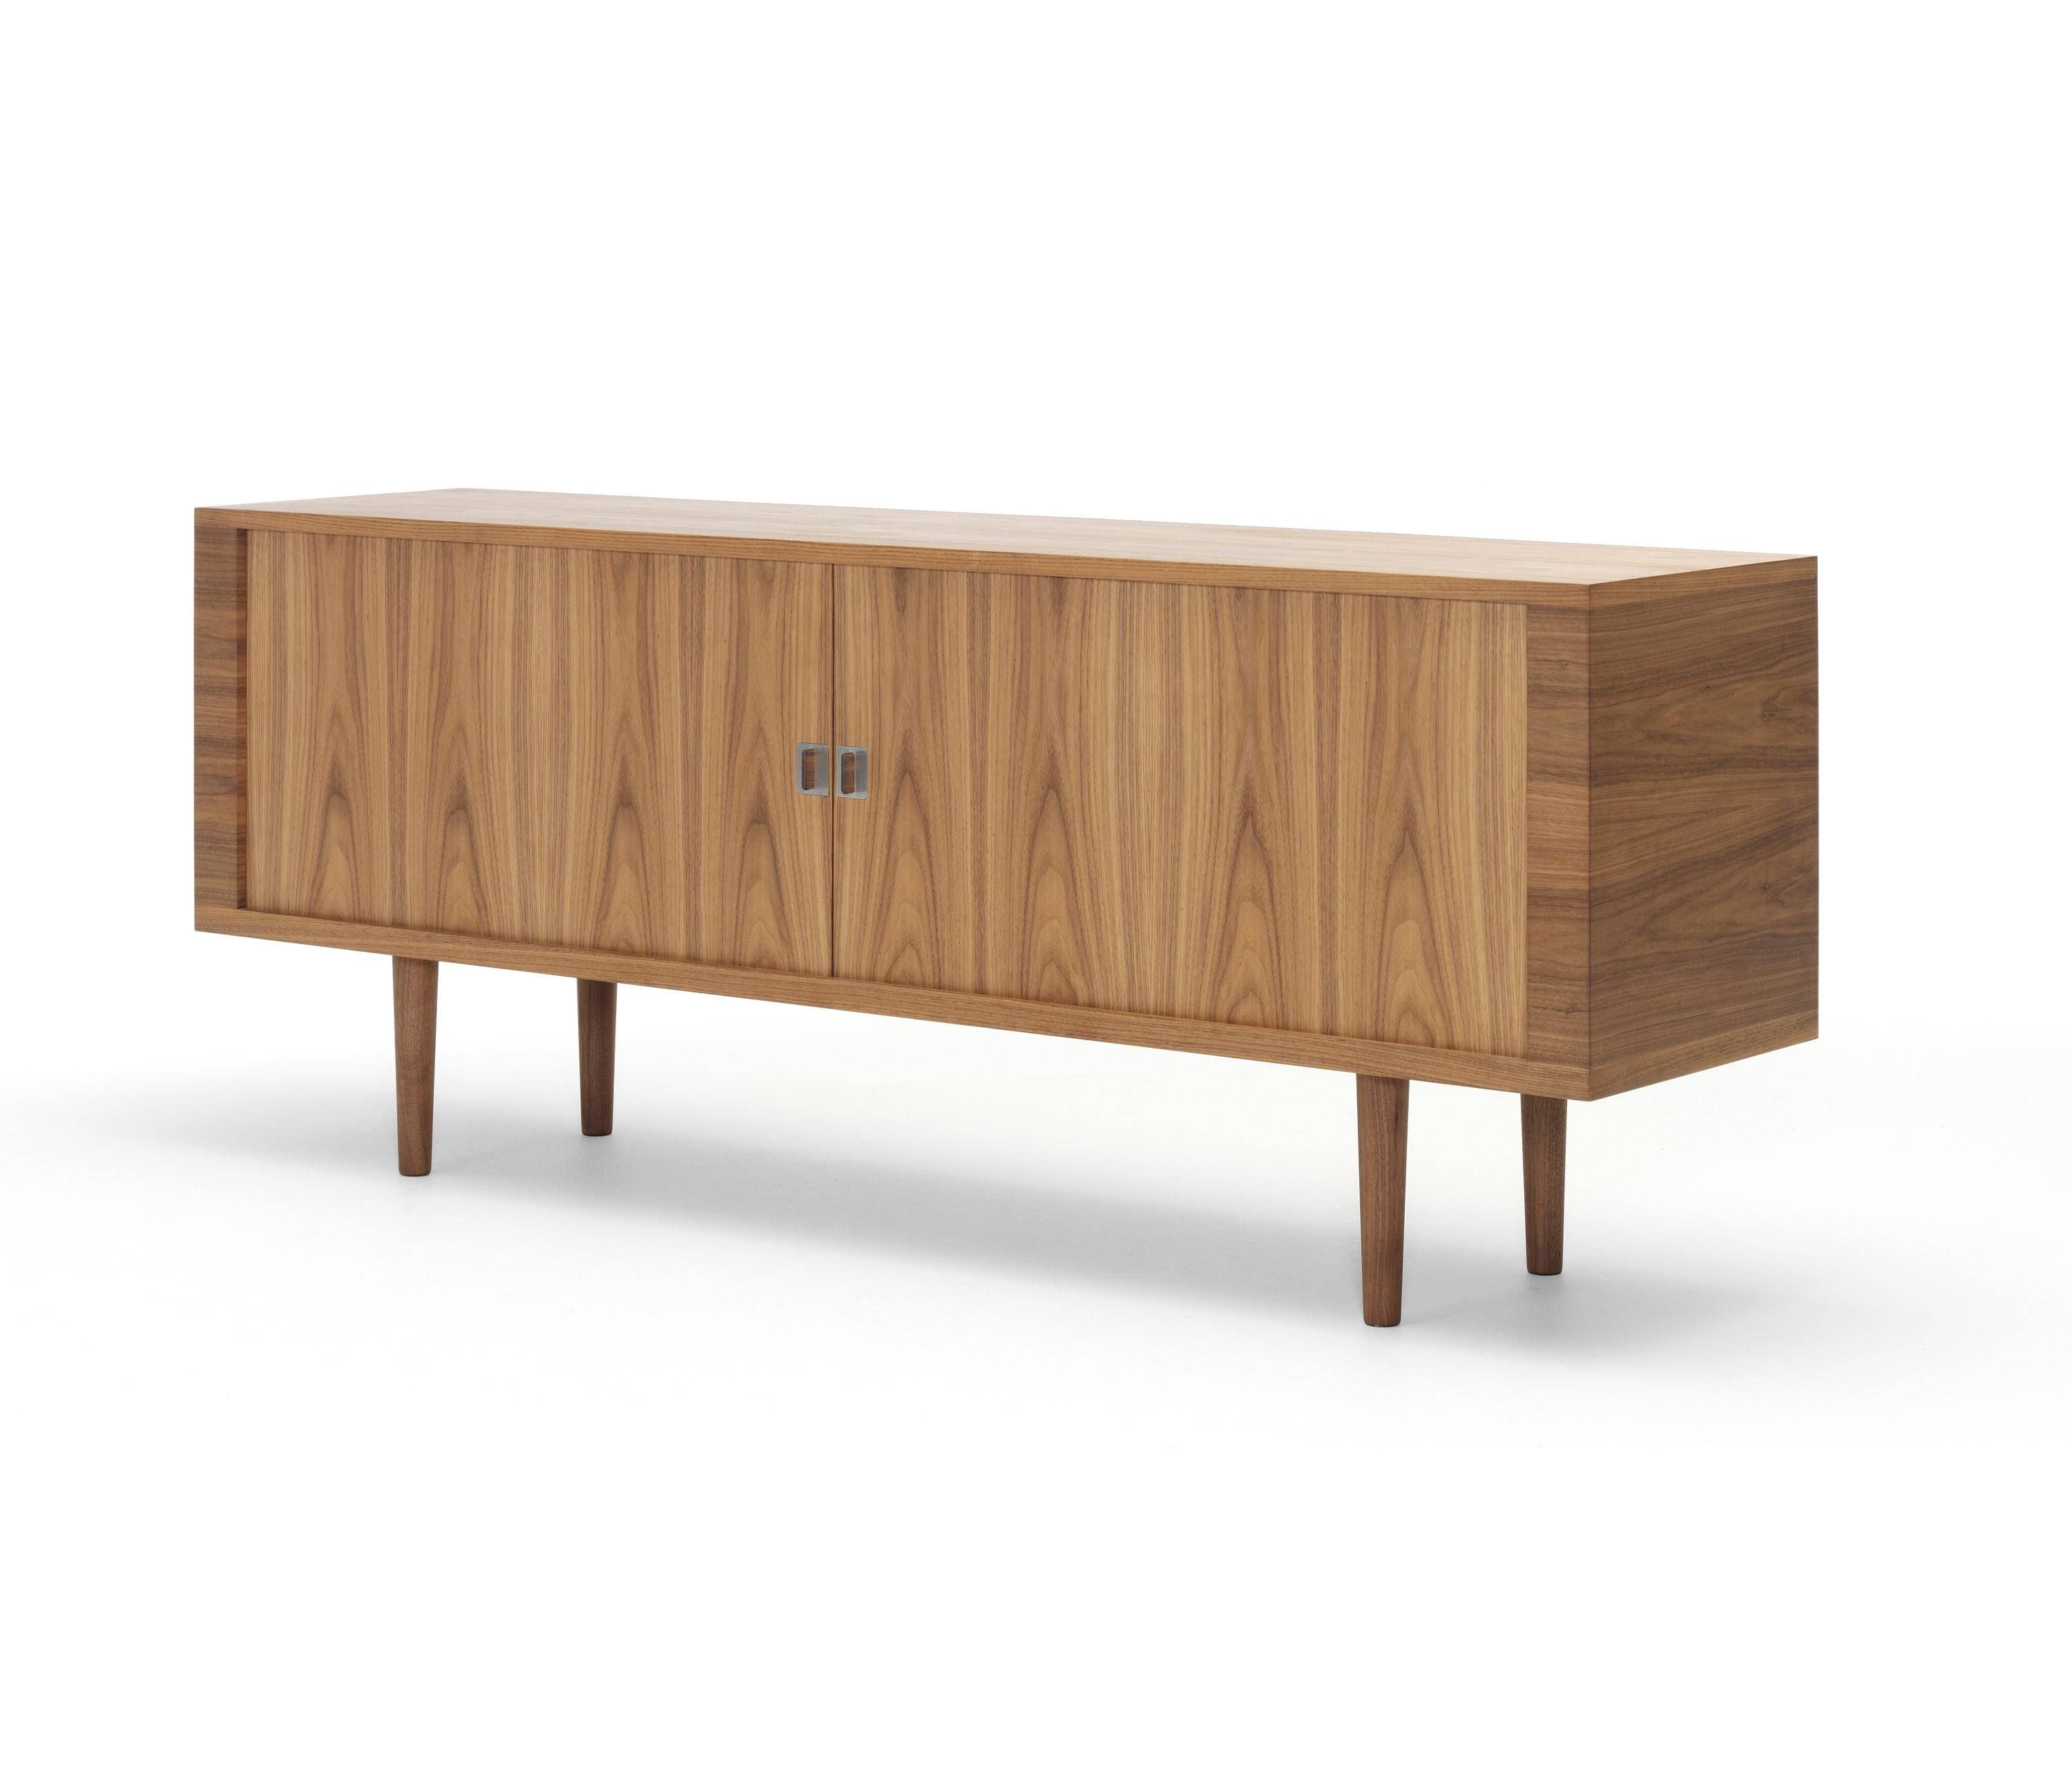 Ch825 Credenza – Sideboards From Carl Hansen & Søn | Architonic Throughout Credenza Sideboards (View 15 of 15)